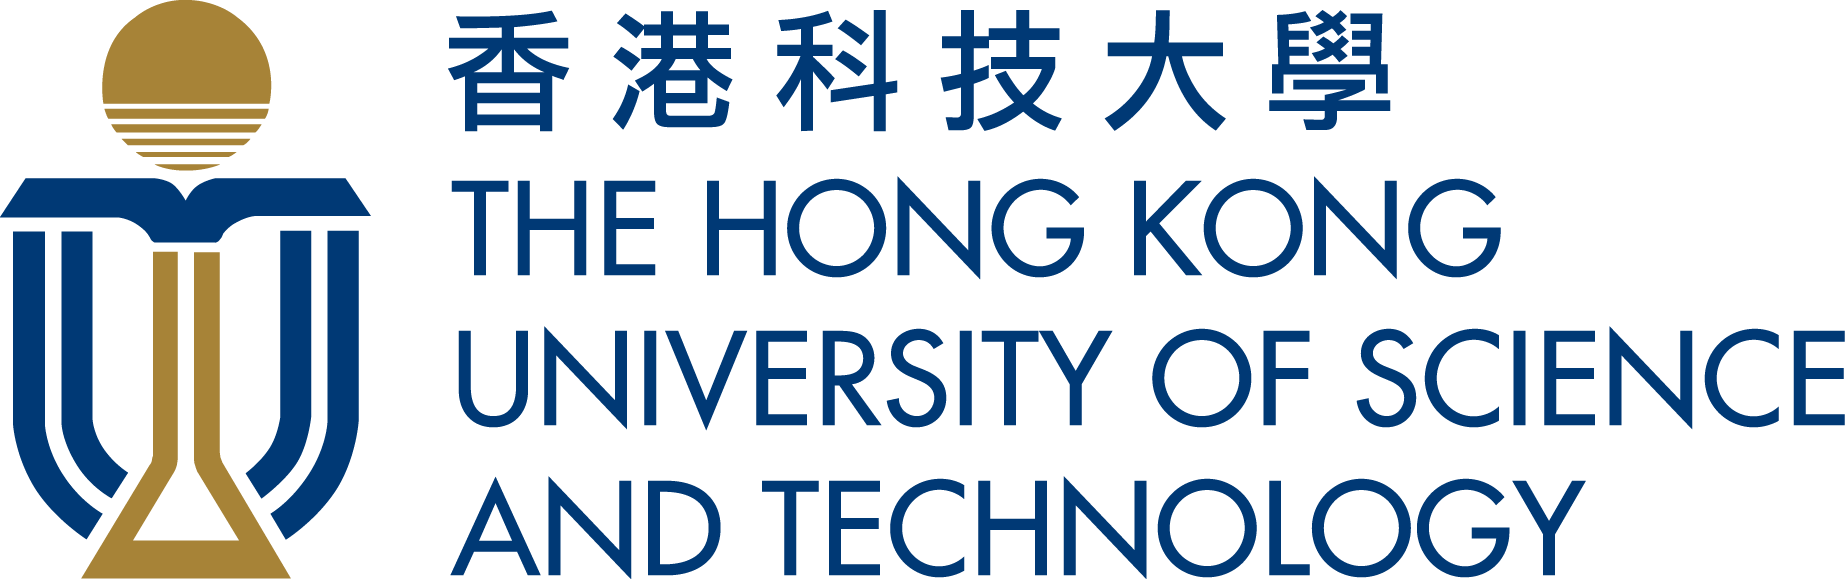 Hong Kong University of Science and Technology – UX and Technology Consulting (2017, HK)